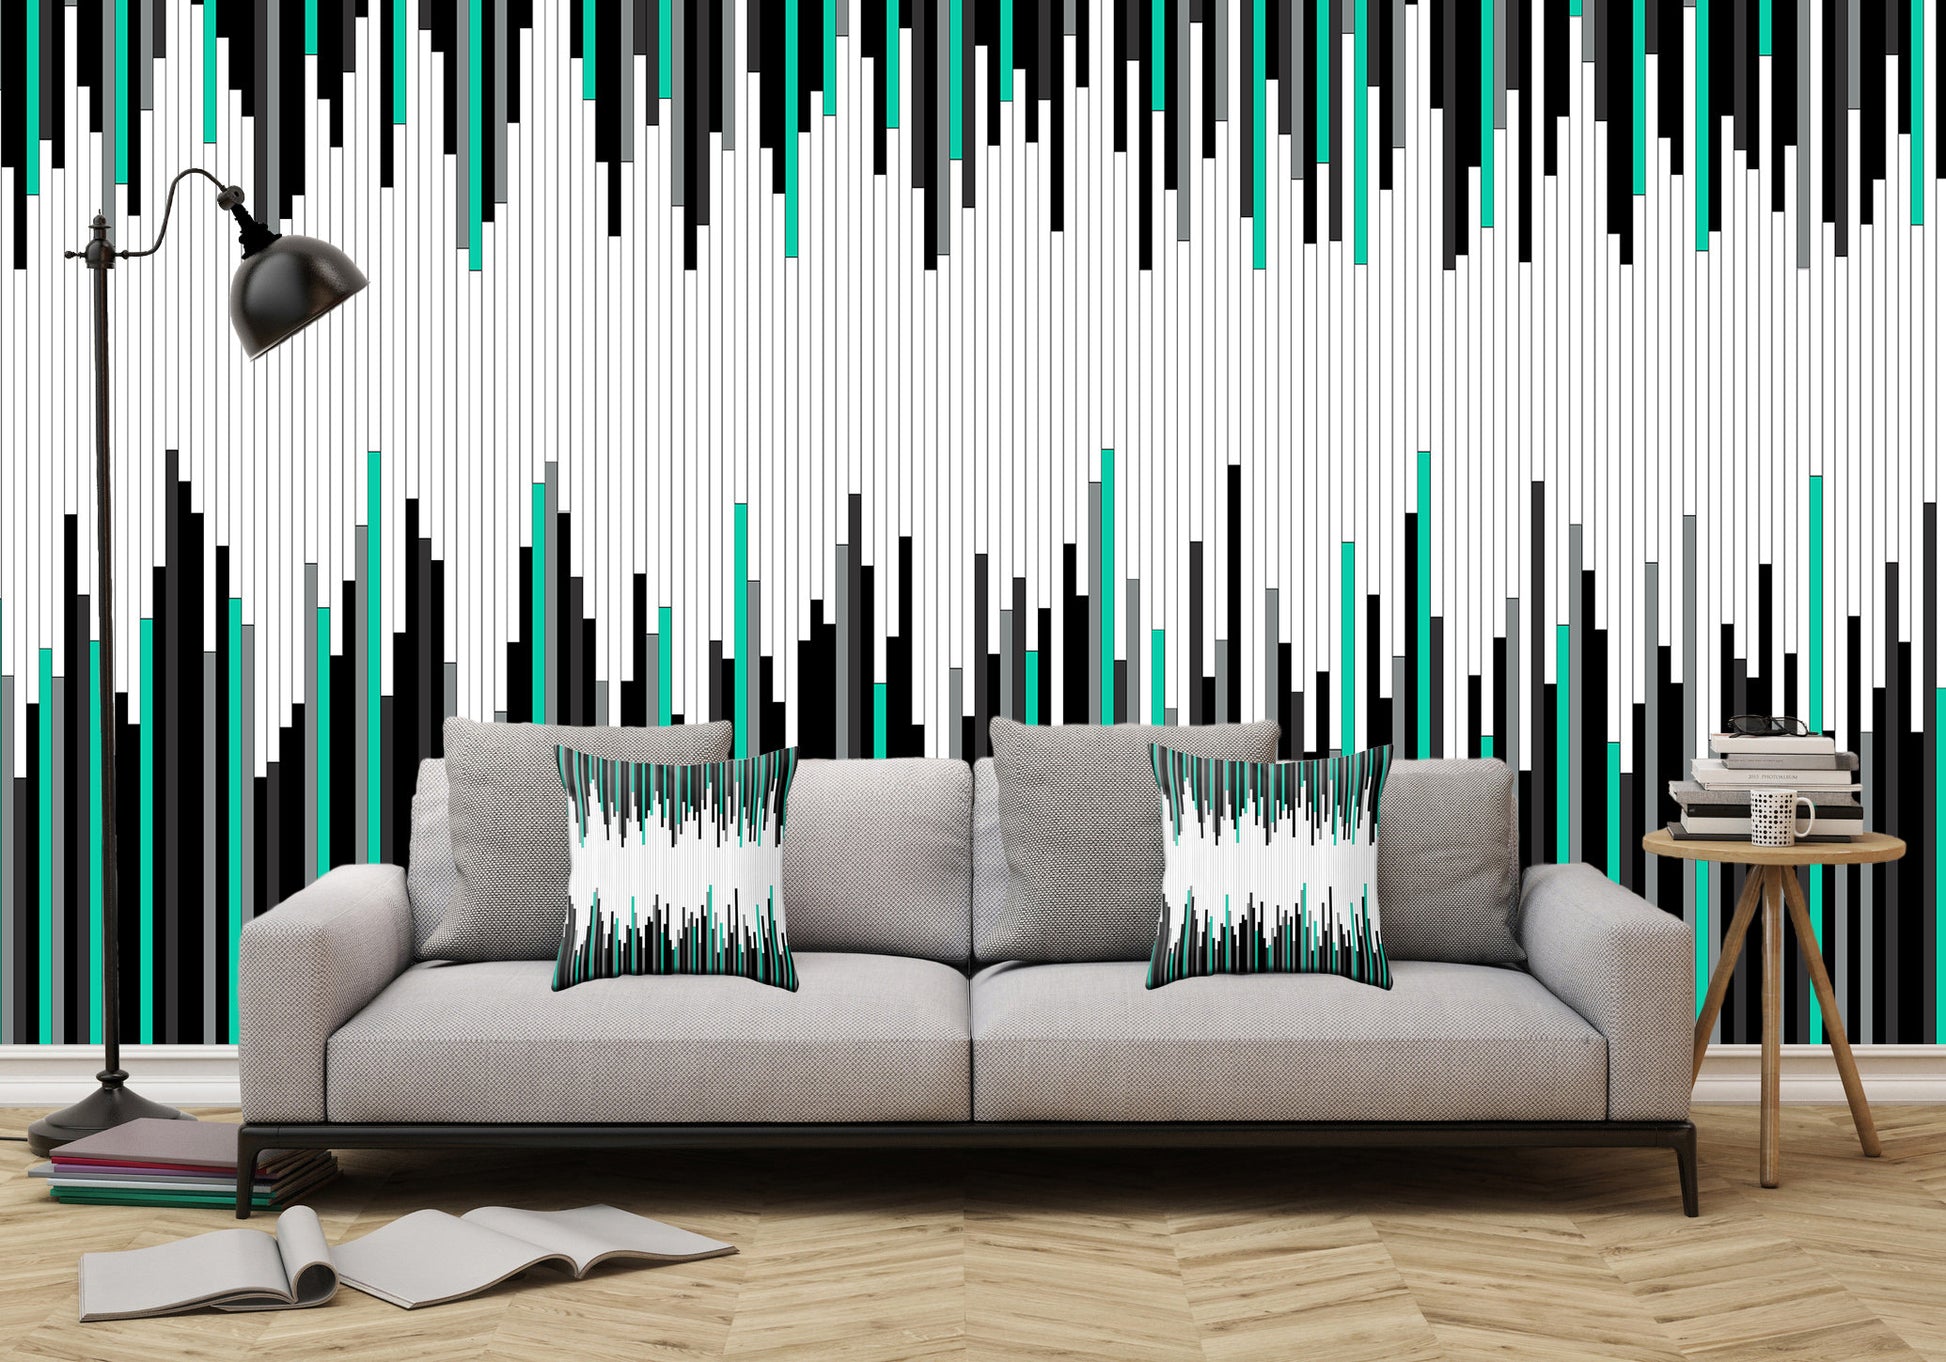 Frequency Line Illustration - Adhesive Wallpaper - Removable Wallpaper - Wall Sticker - Full Size Wall Mural  - PIPAFINEART